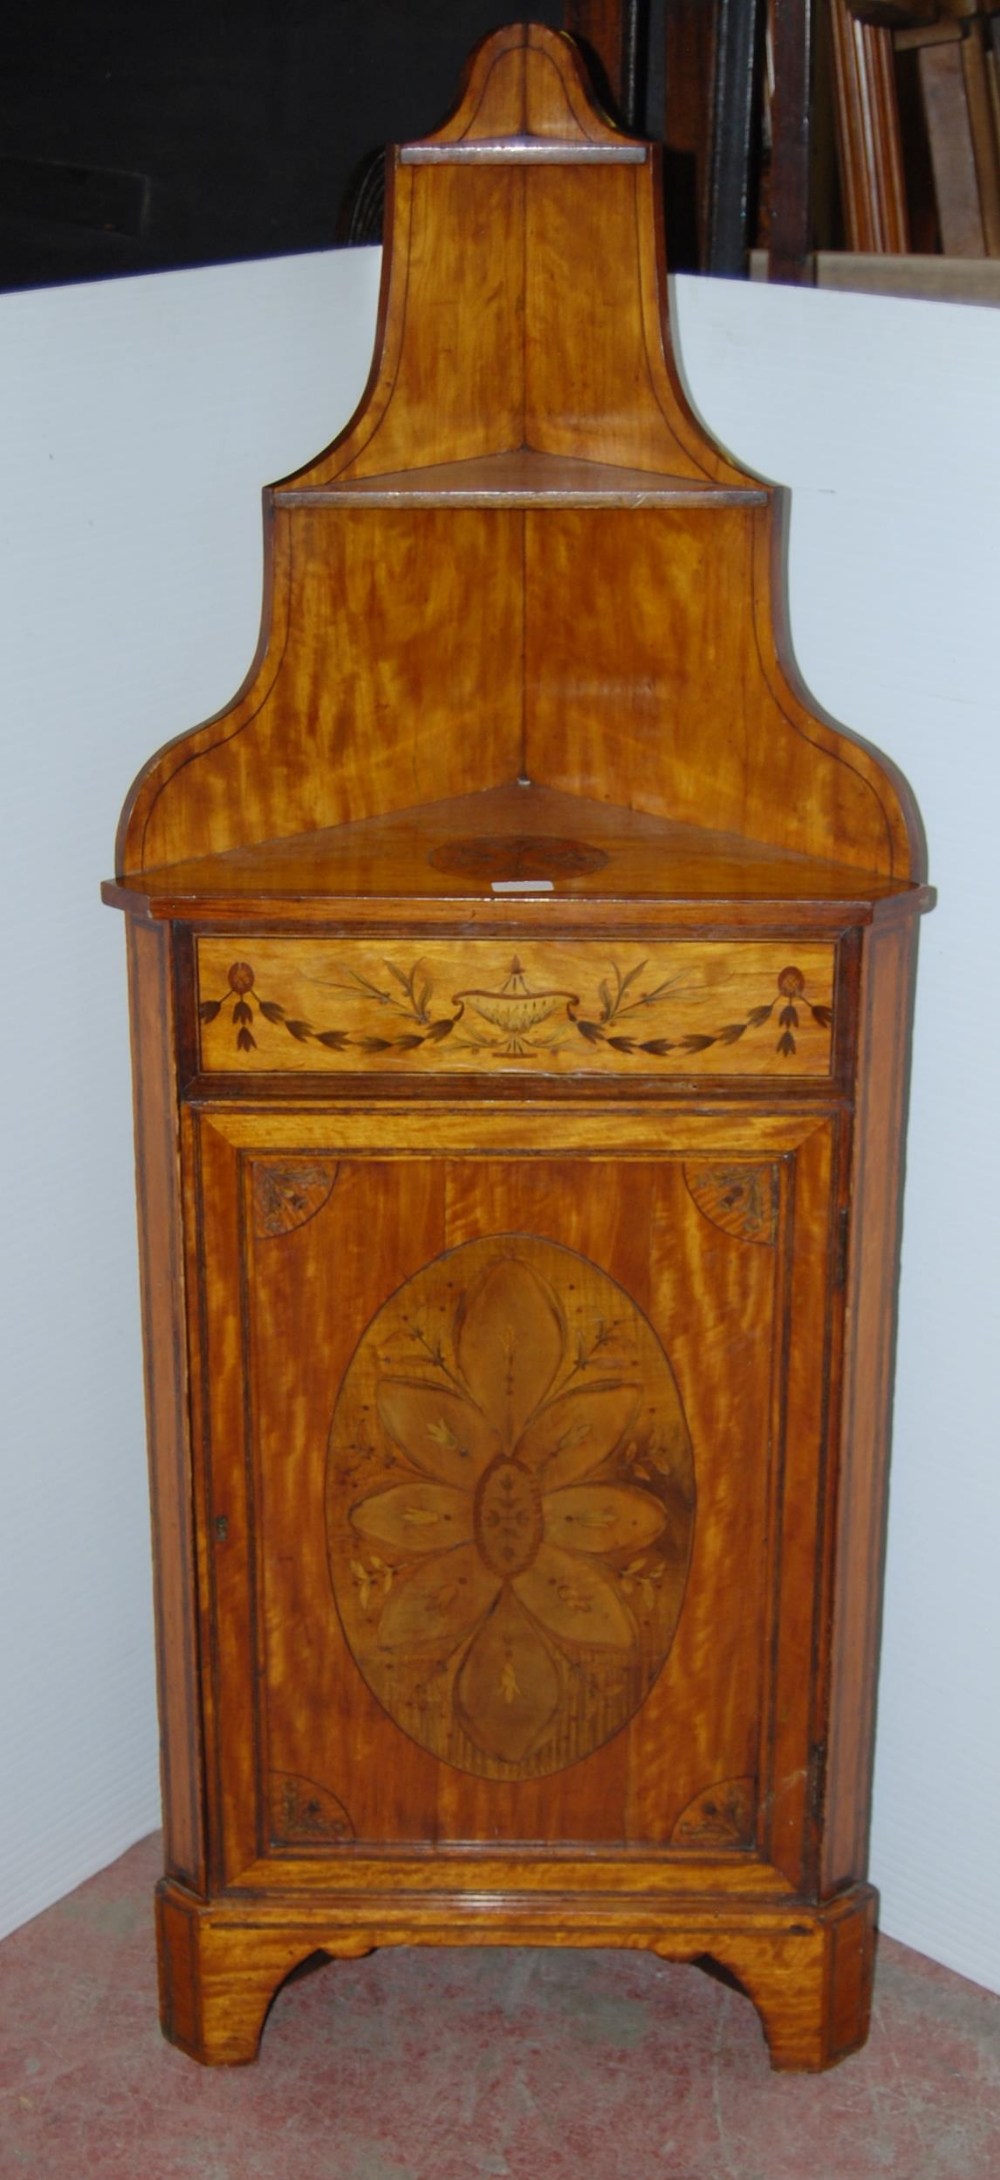 19th century inlaid satinwood corner cabinet, inlaid with urns and foliage, 90cm high and 53cm wide.